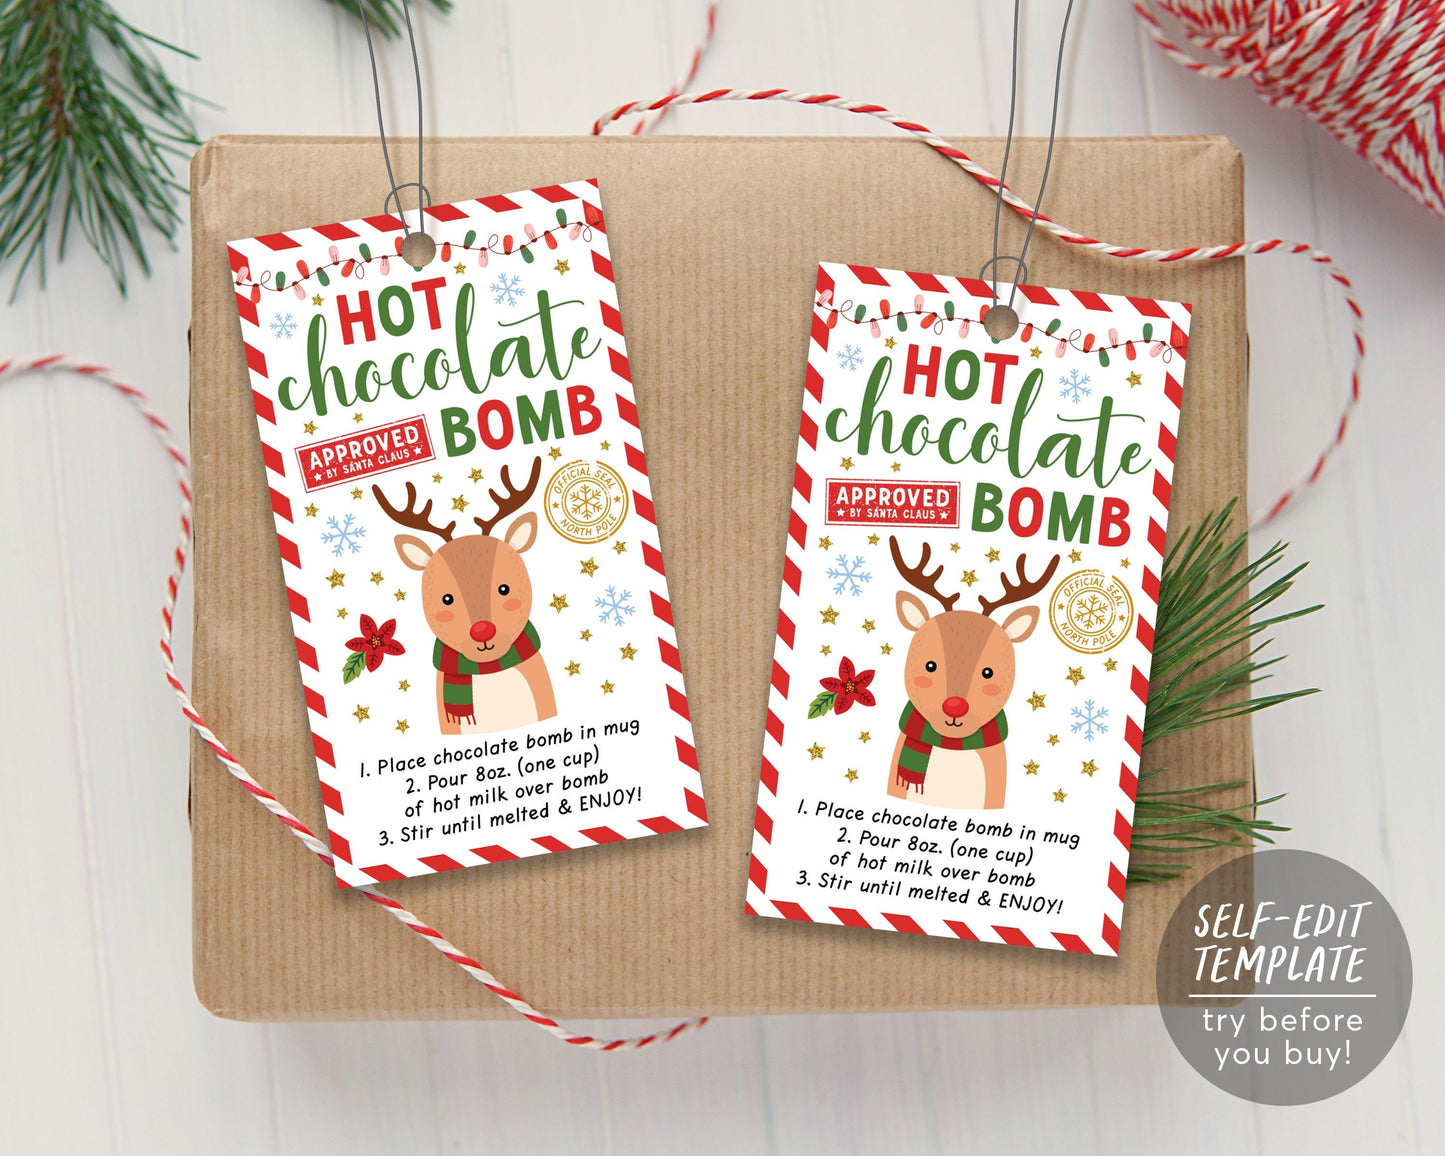 Editable Christmas Gift Tags for Students for Holiday Party with Reindeer